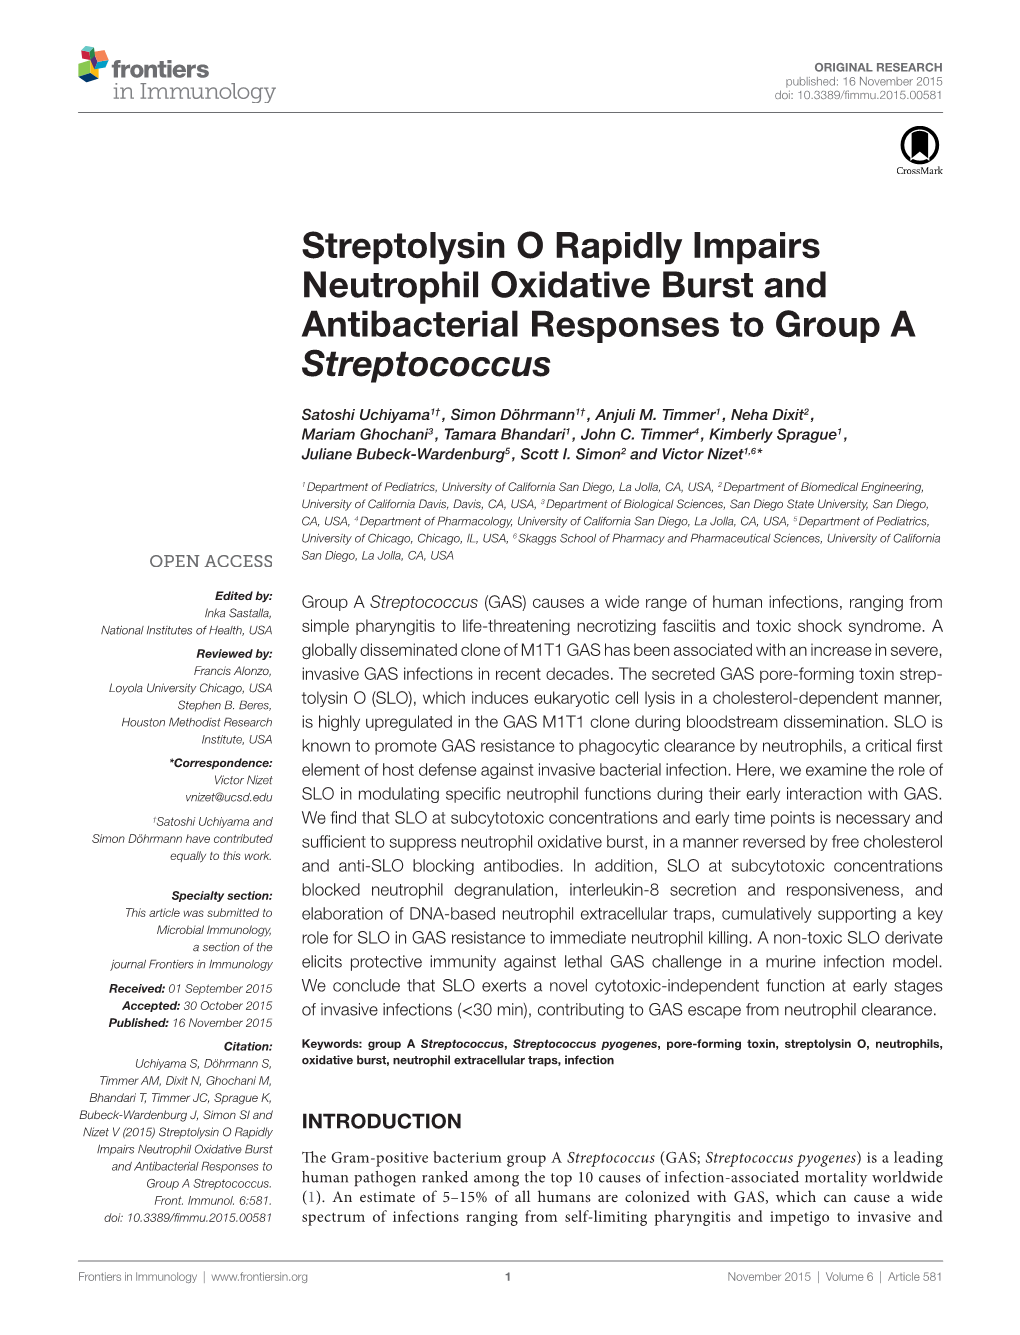 Streptolysin O Rapidly Impairs Neutrophil Oxidative Burst and Antibacterial Responses to Group a Streptococcus